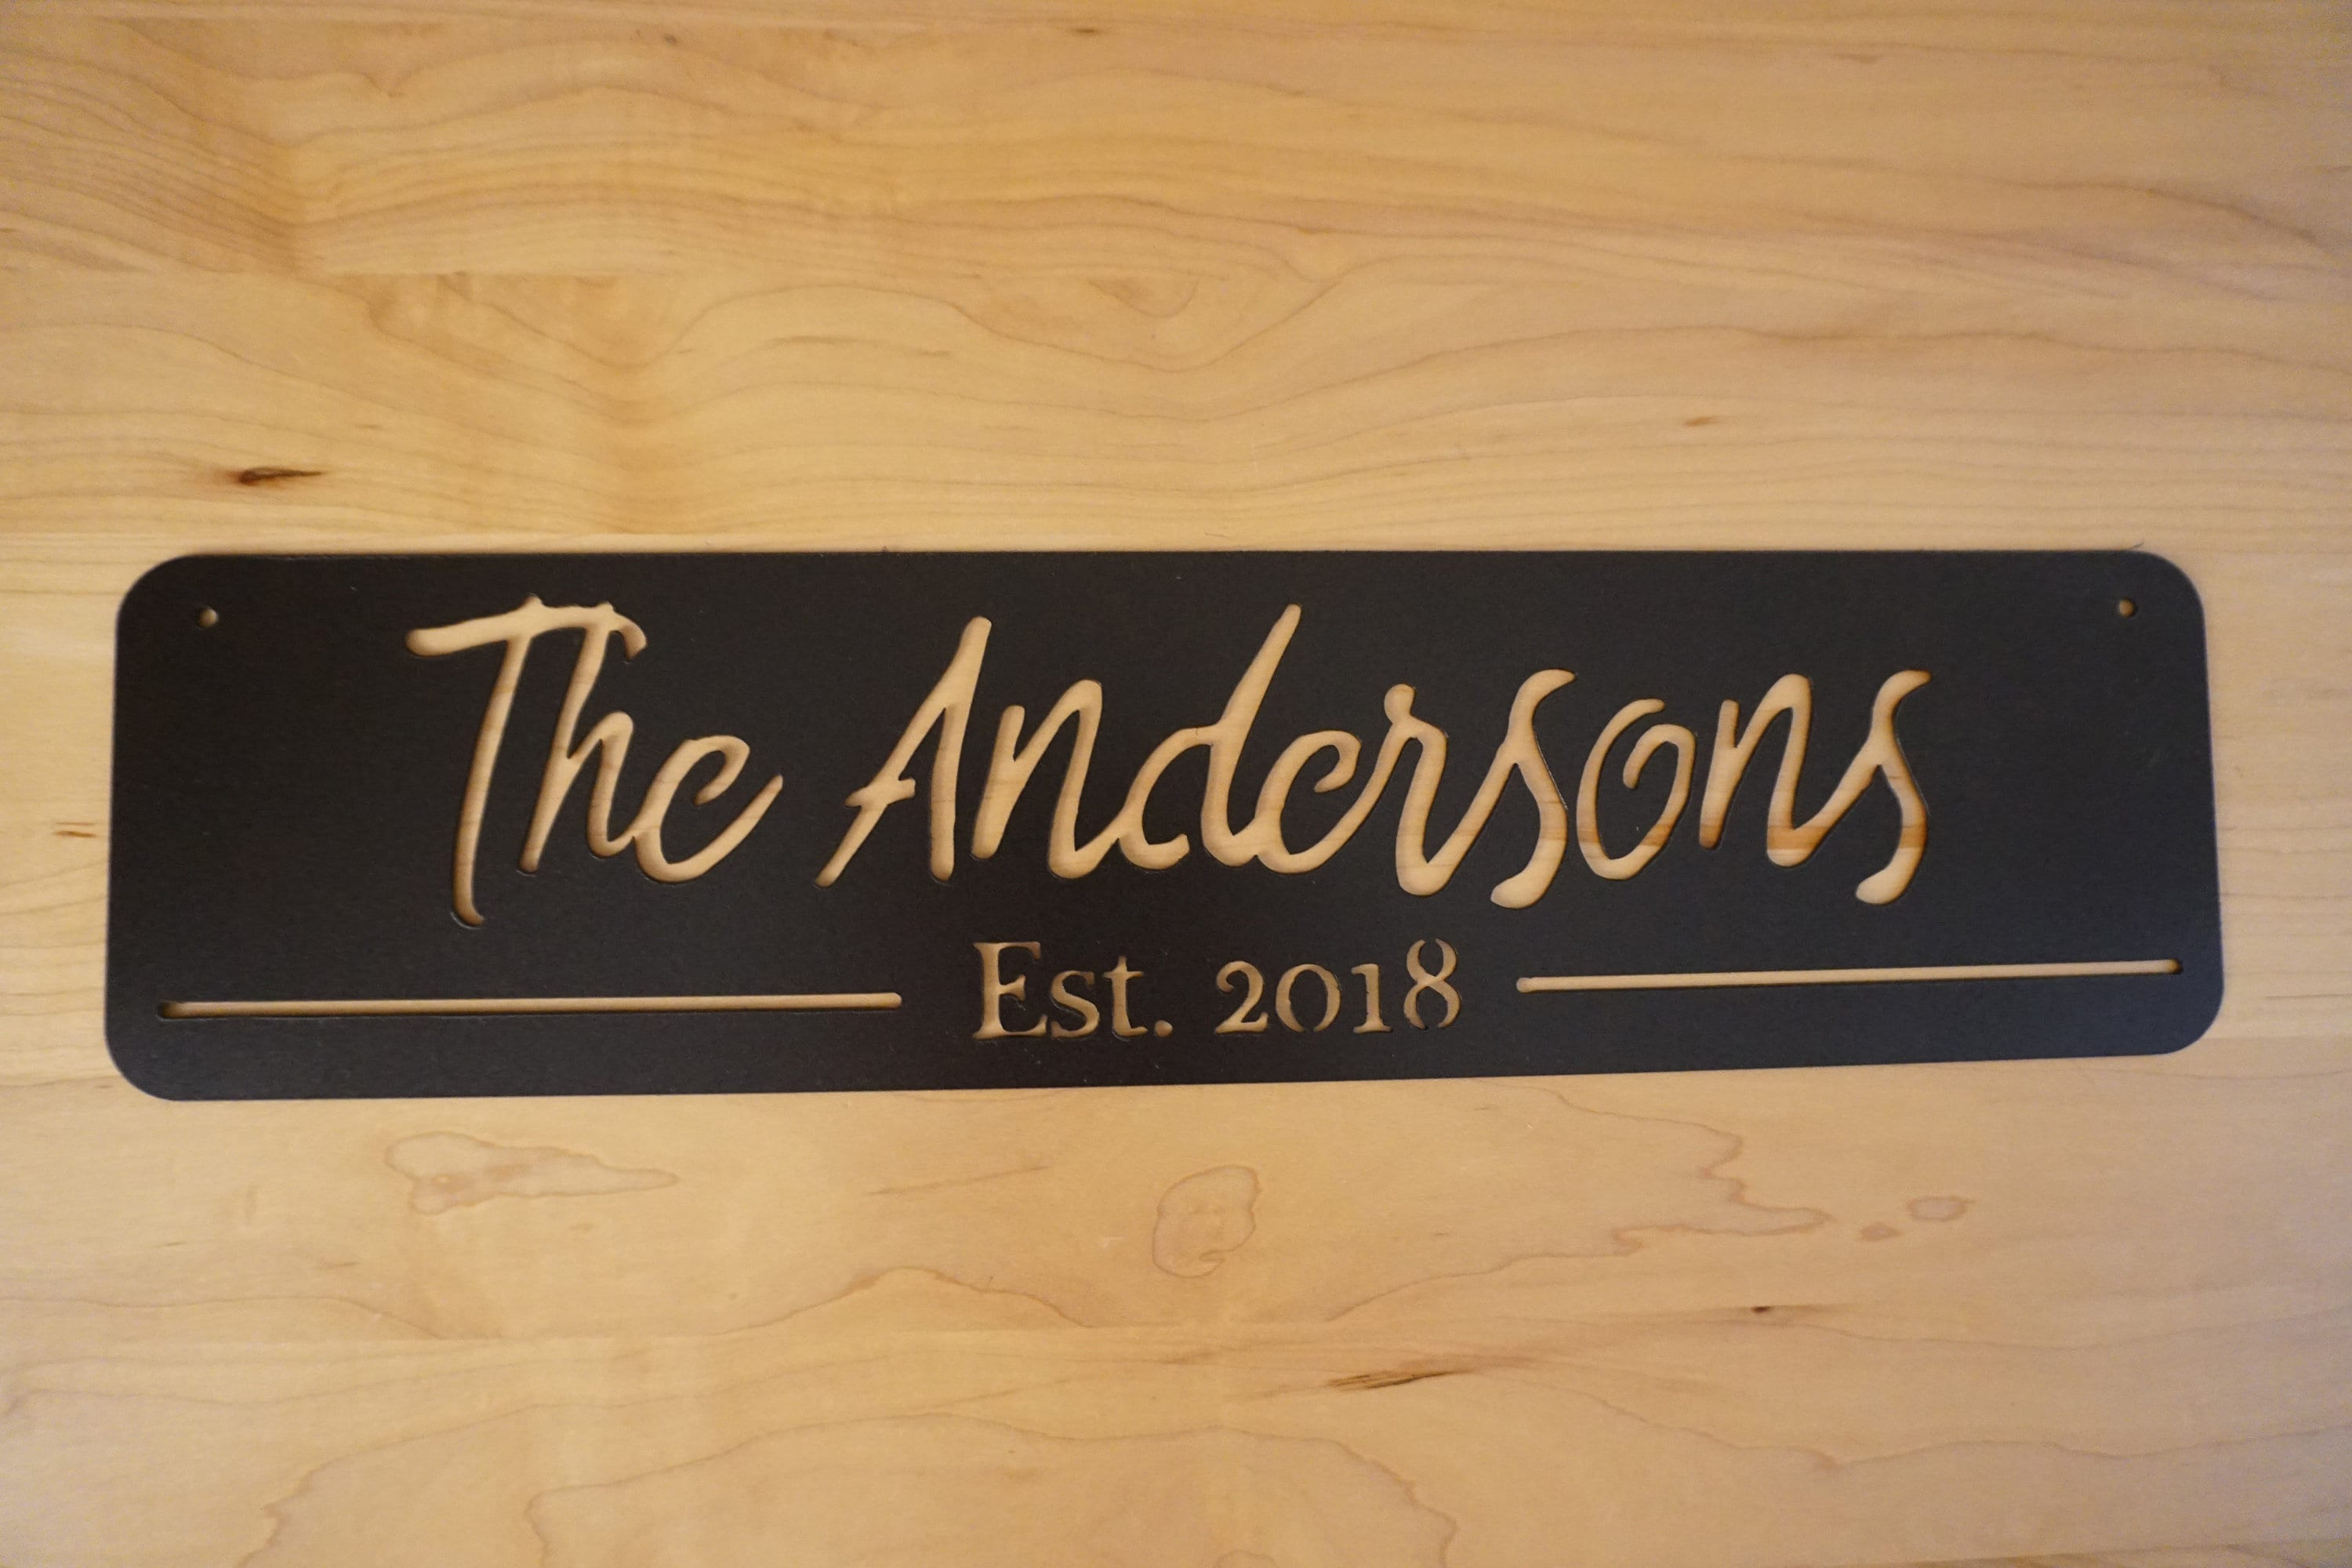 Established Sign, Establish Sign, Custom Metal Sign, Metal Signs Personalized, Personalized Metal Sign, Name And Date Sign, Outdoor Signs Laser Cut Metal Signs Custom Gift Ideas 12x12IN